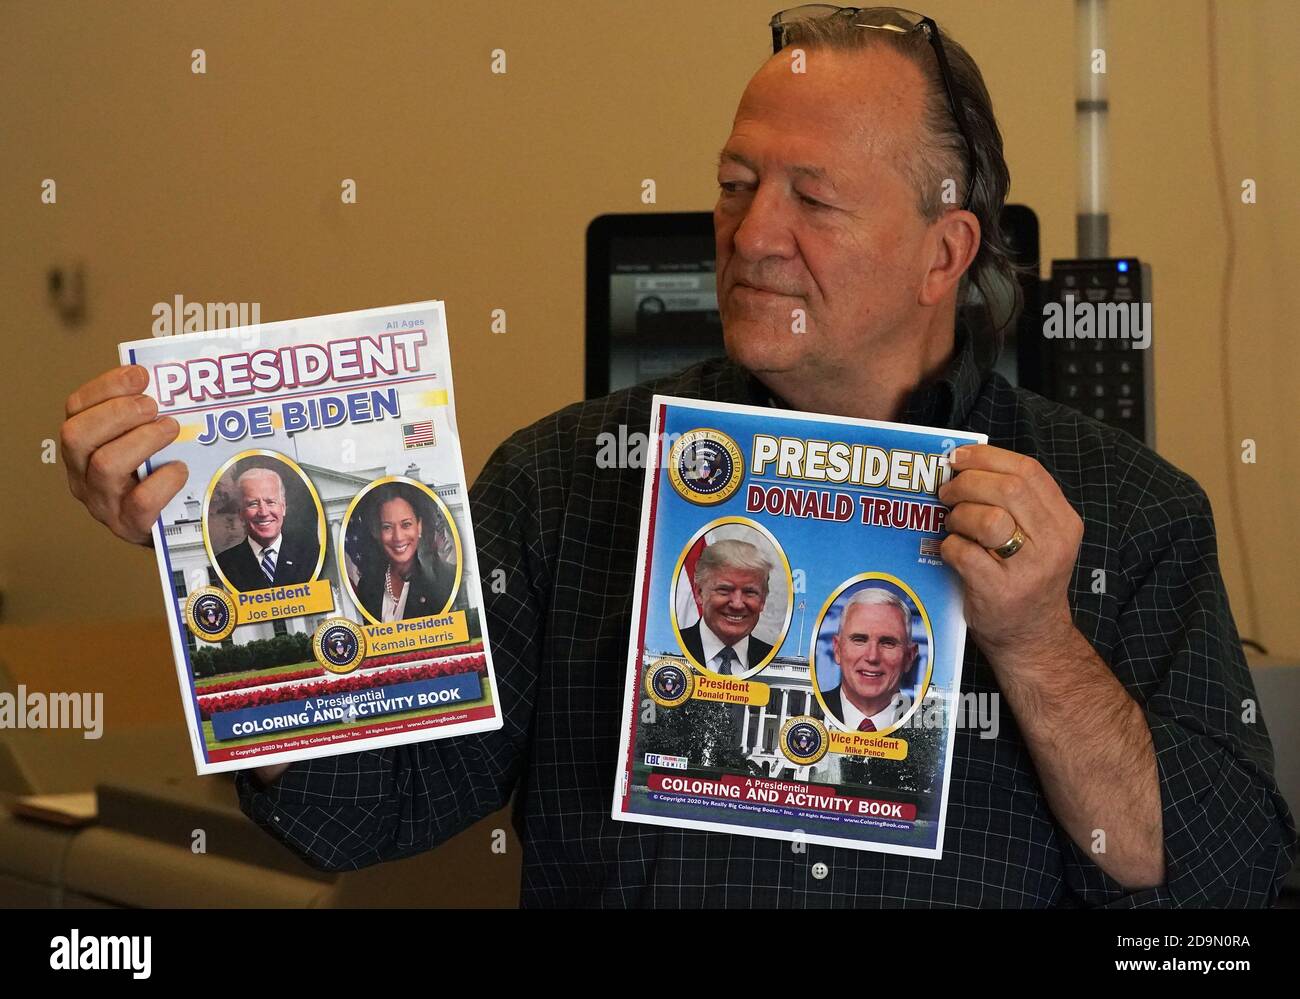 Olivette, Missouri, USA. 06th Nov, 2020. Wayne Bell, Founder and CEO of Really Big Coloring Books, Inc. displays the new coloring books showing the Joe Biden and Donald Trump campaigns as the newly elected President of the United States, at their Olivette, Missouri office on Friday, November 6, 2020. One version will be printed as soon as election results are official. This coloring book is designed for children and parents alike that contains patriotic songs, historical locations and pages describing how children may be involved in their local community, along with games, mazes and puzzles. P Stock Photo